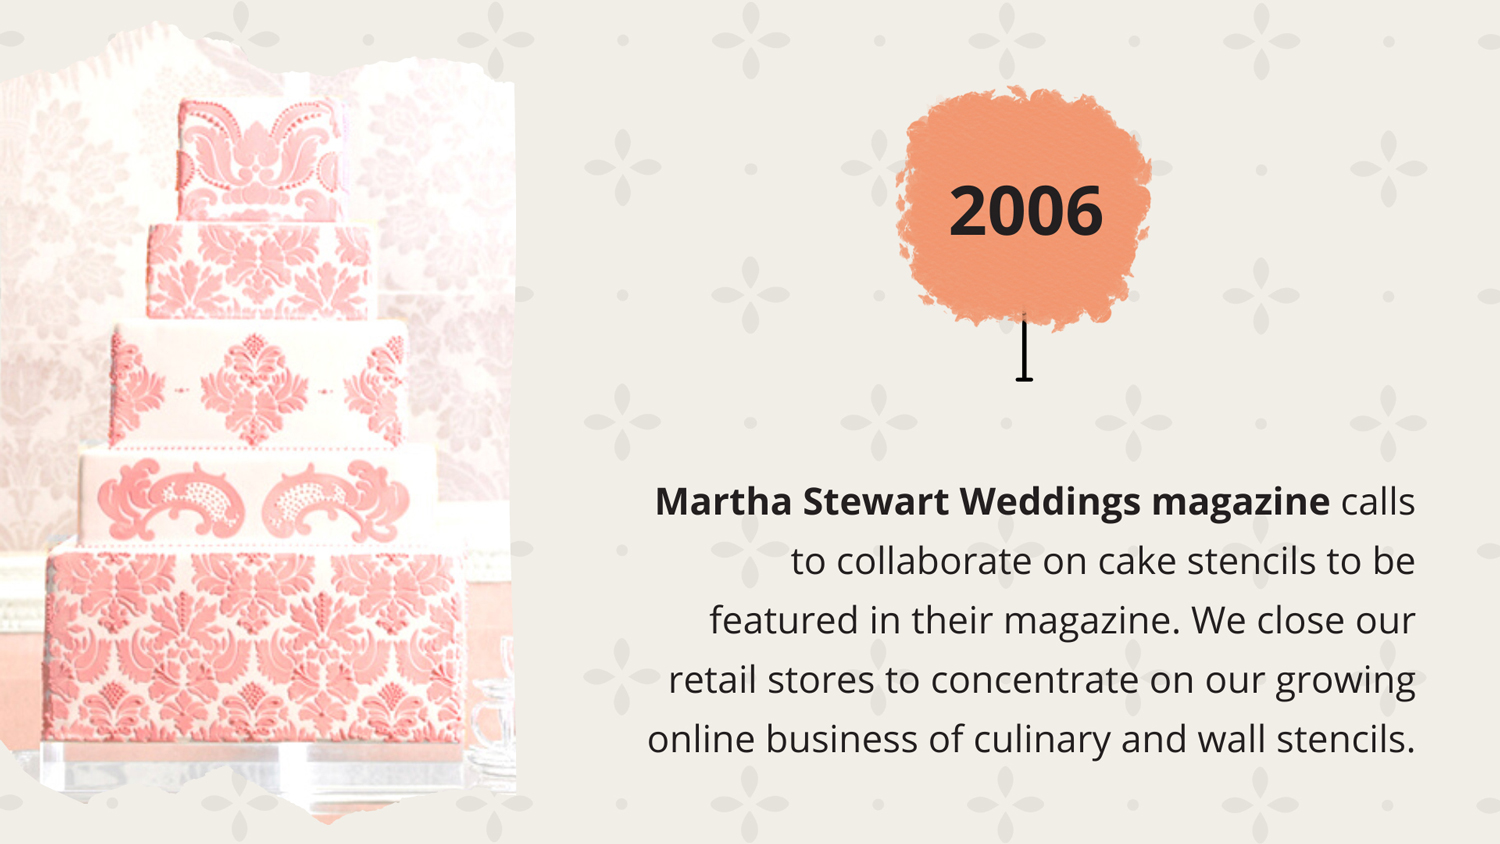 2006 - Martha Stewart Weddings magazine calls to collaborate on cake stencils to be featured in their magazine. We close our retail stores to concentrate on our growing online business of culinary and wall stencils.